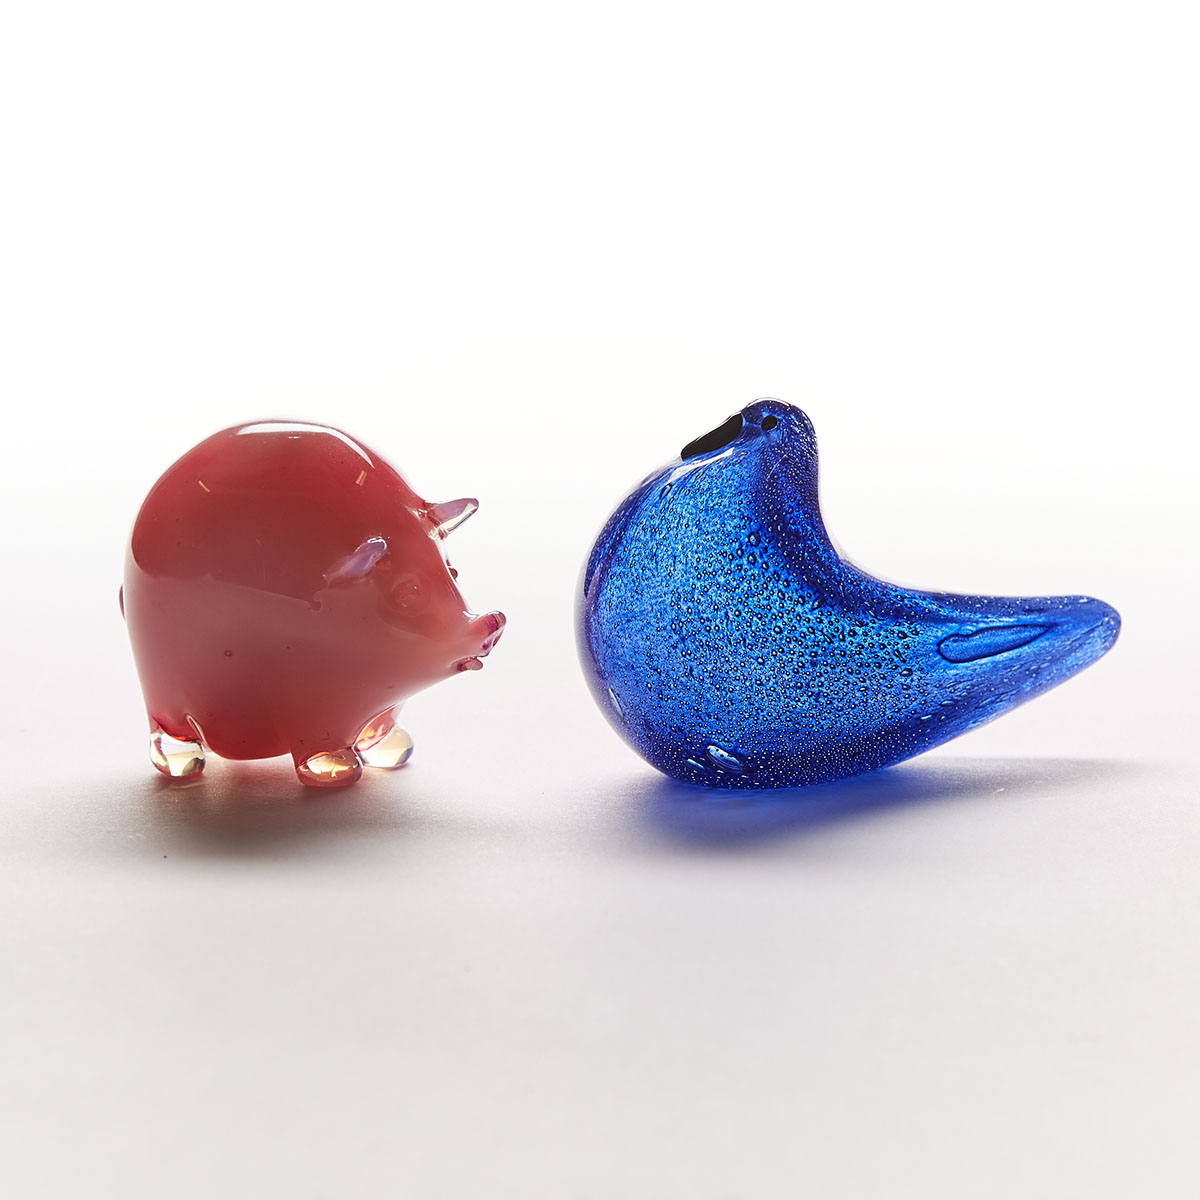 Seguso Small Glass Pig and a Barovier Bird, mid-20th century